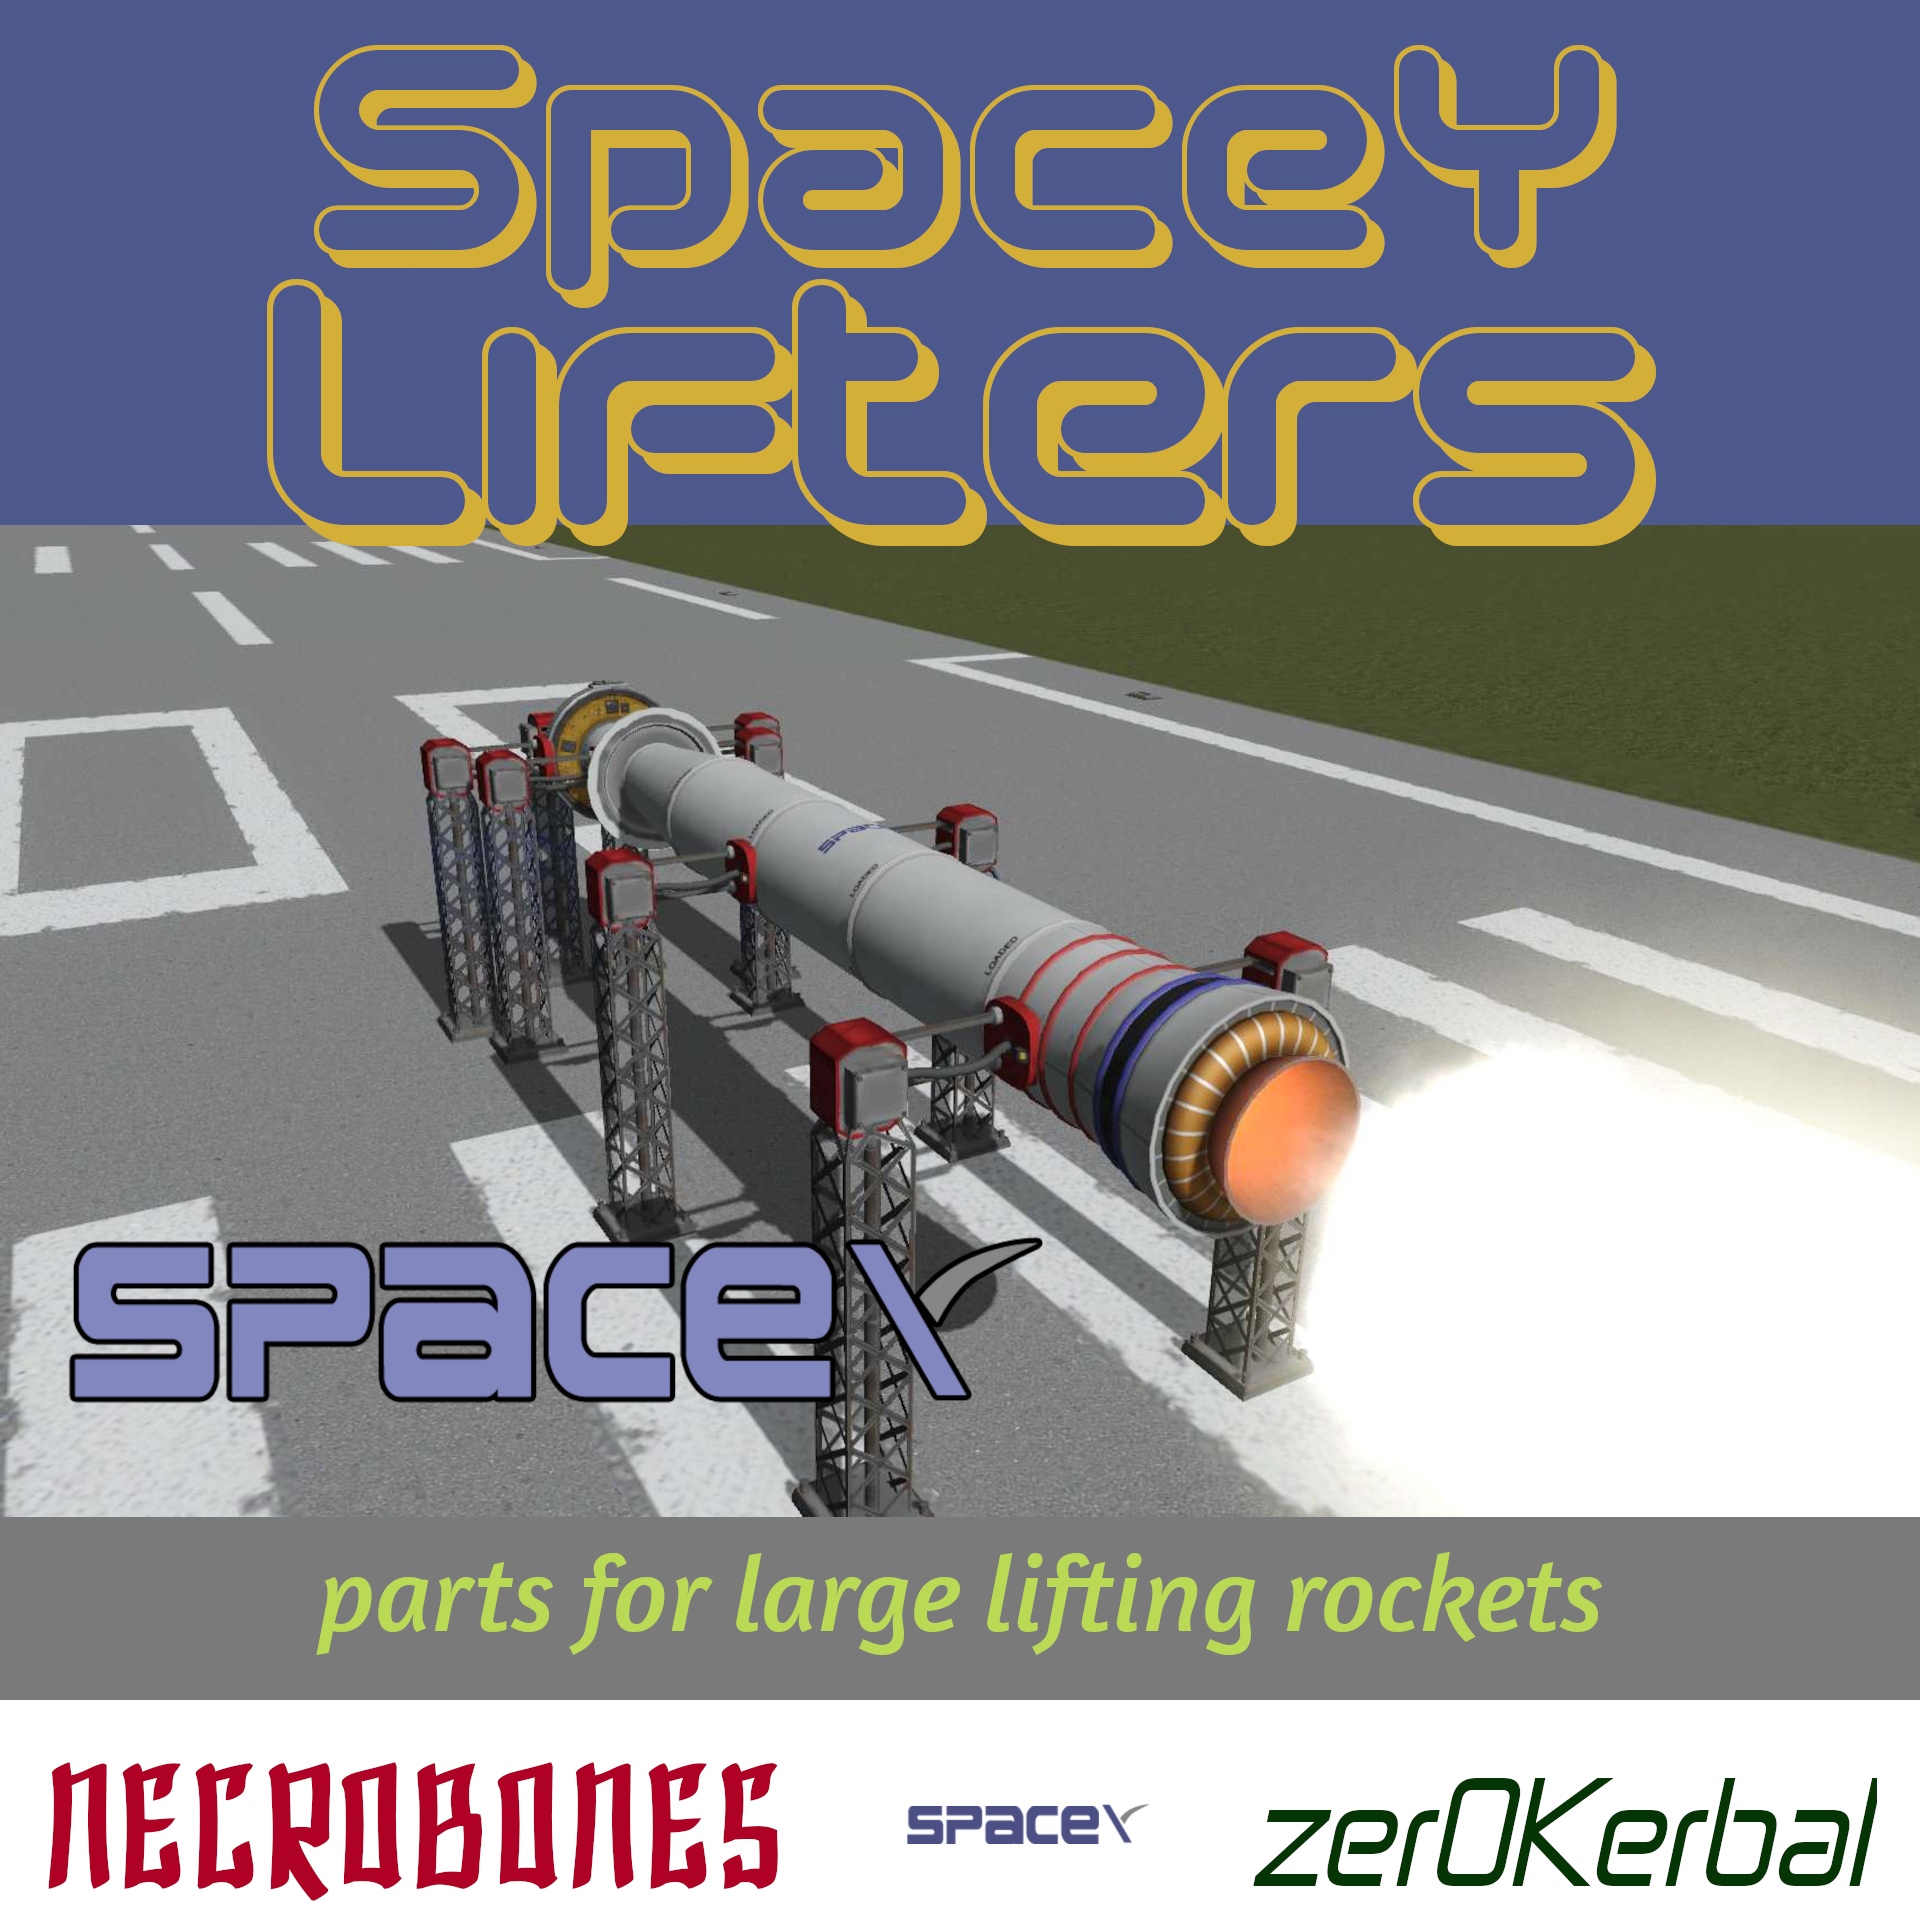 SpaceY Lifters (SYL) by NecroBones project avatar